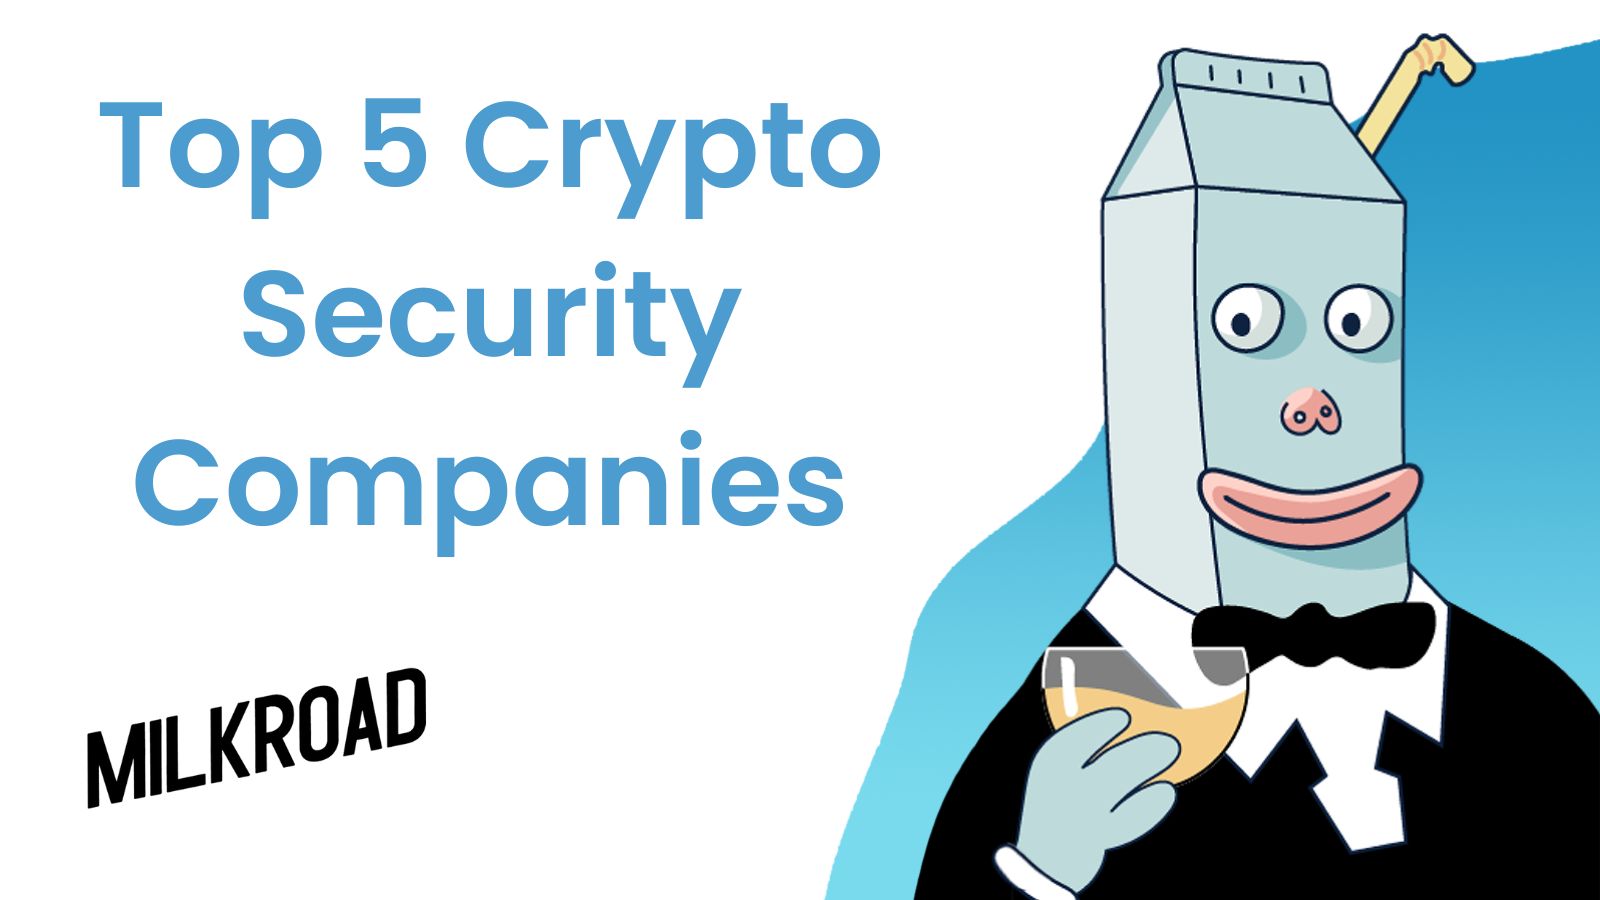 Top 5 Crypto Security Companies To Reduce Risk